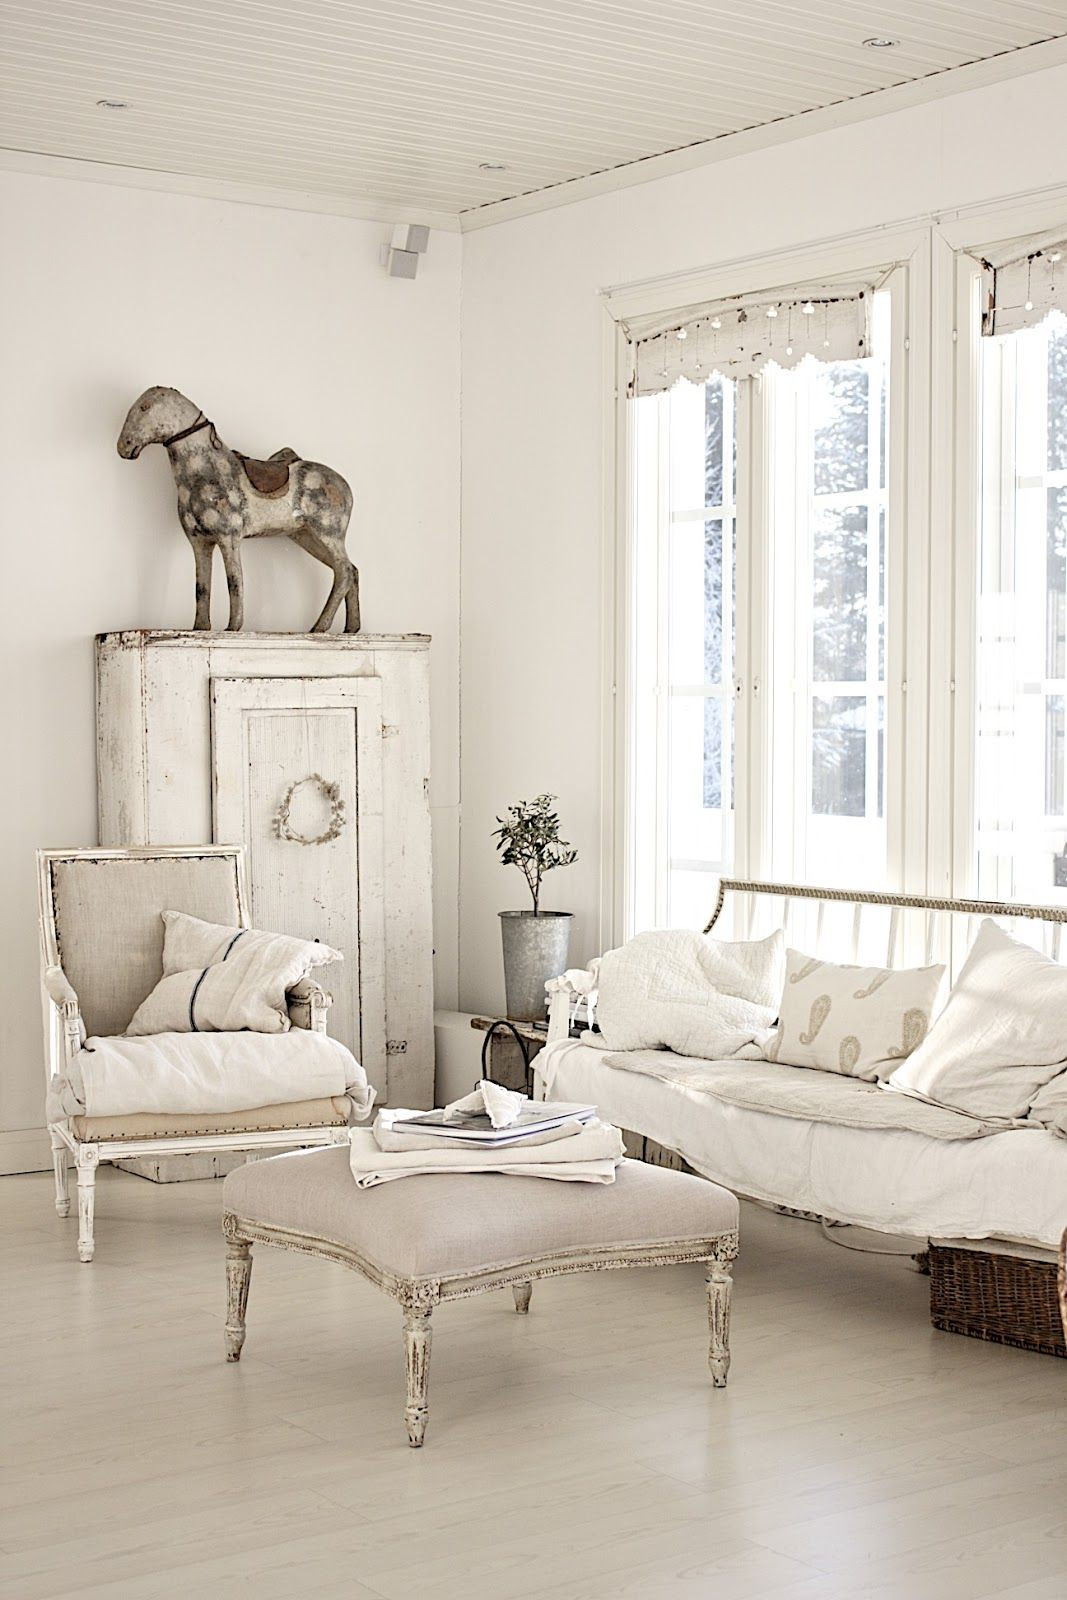 Rustic Shabby Chic Living Room
 Living Room Whitewashed chippy shabby chic french country